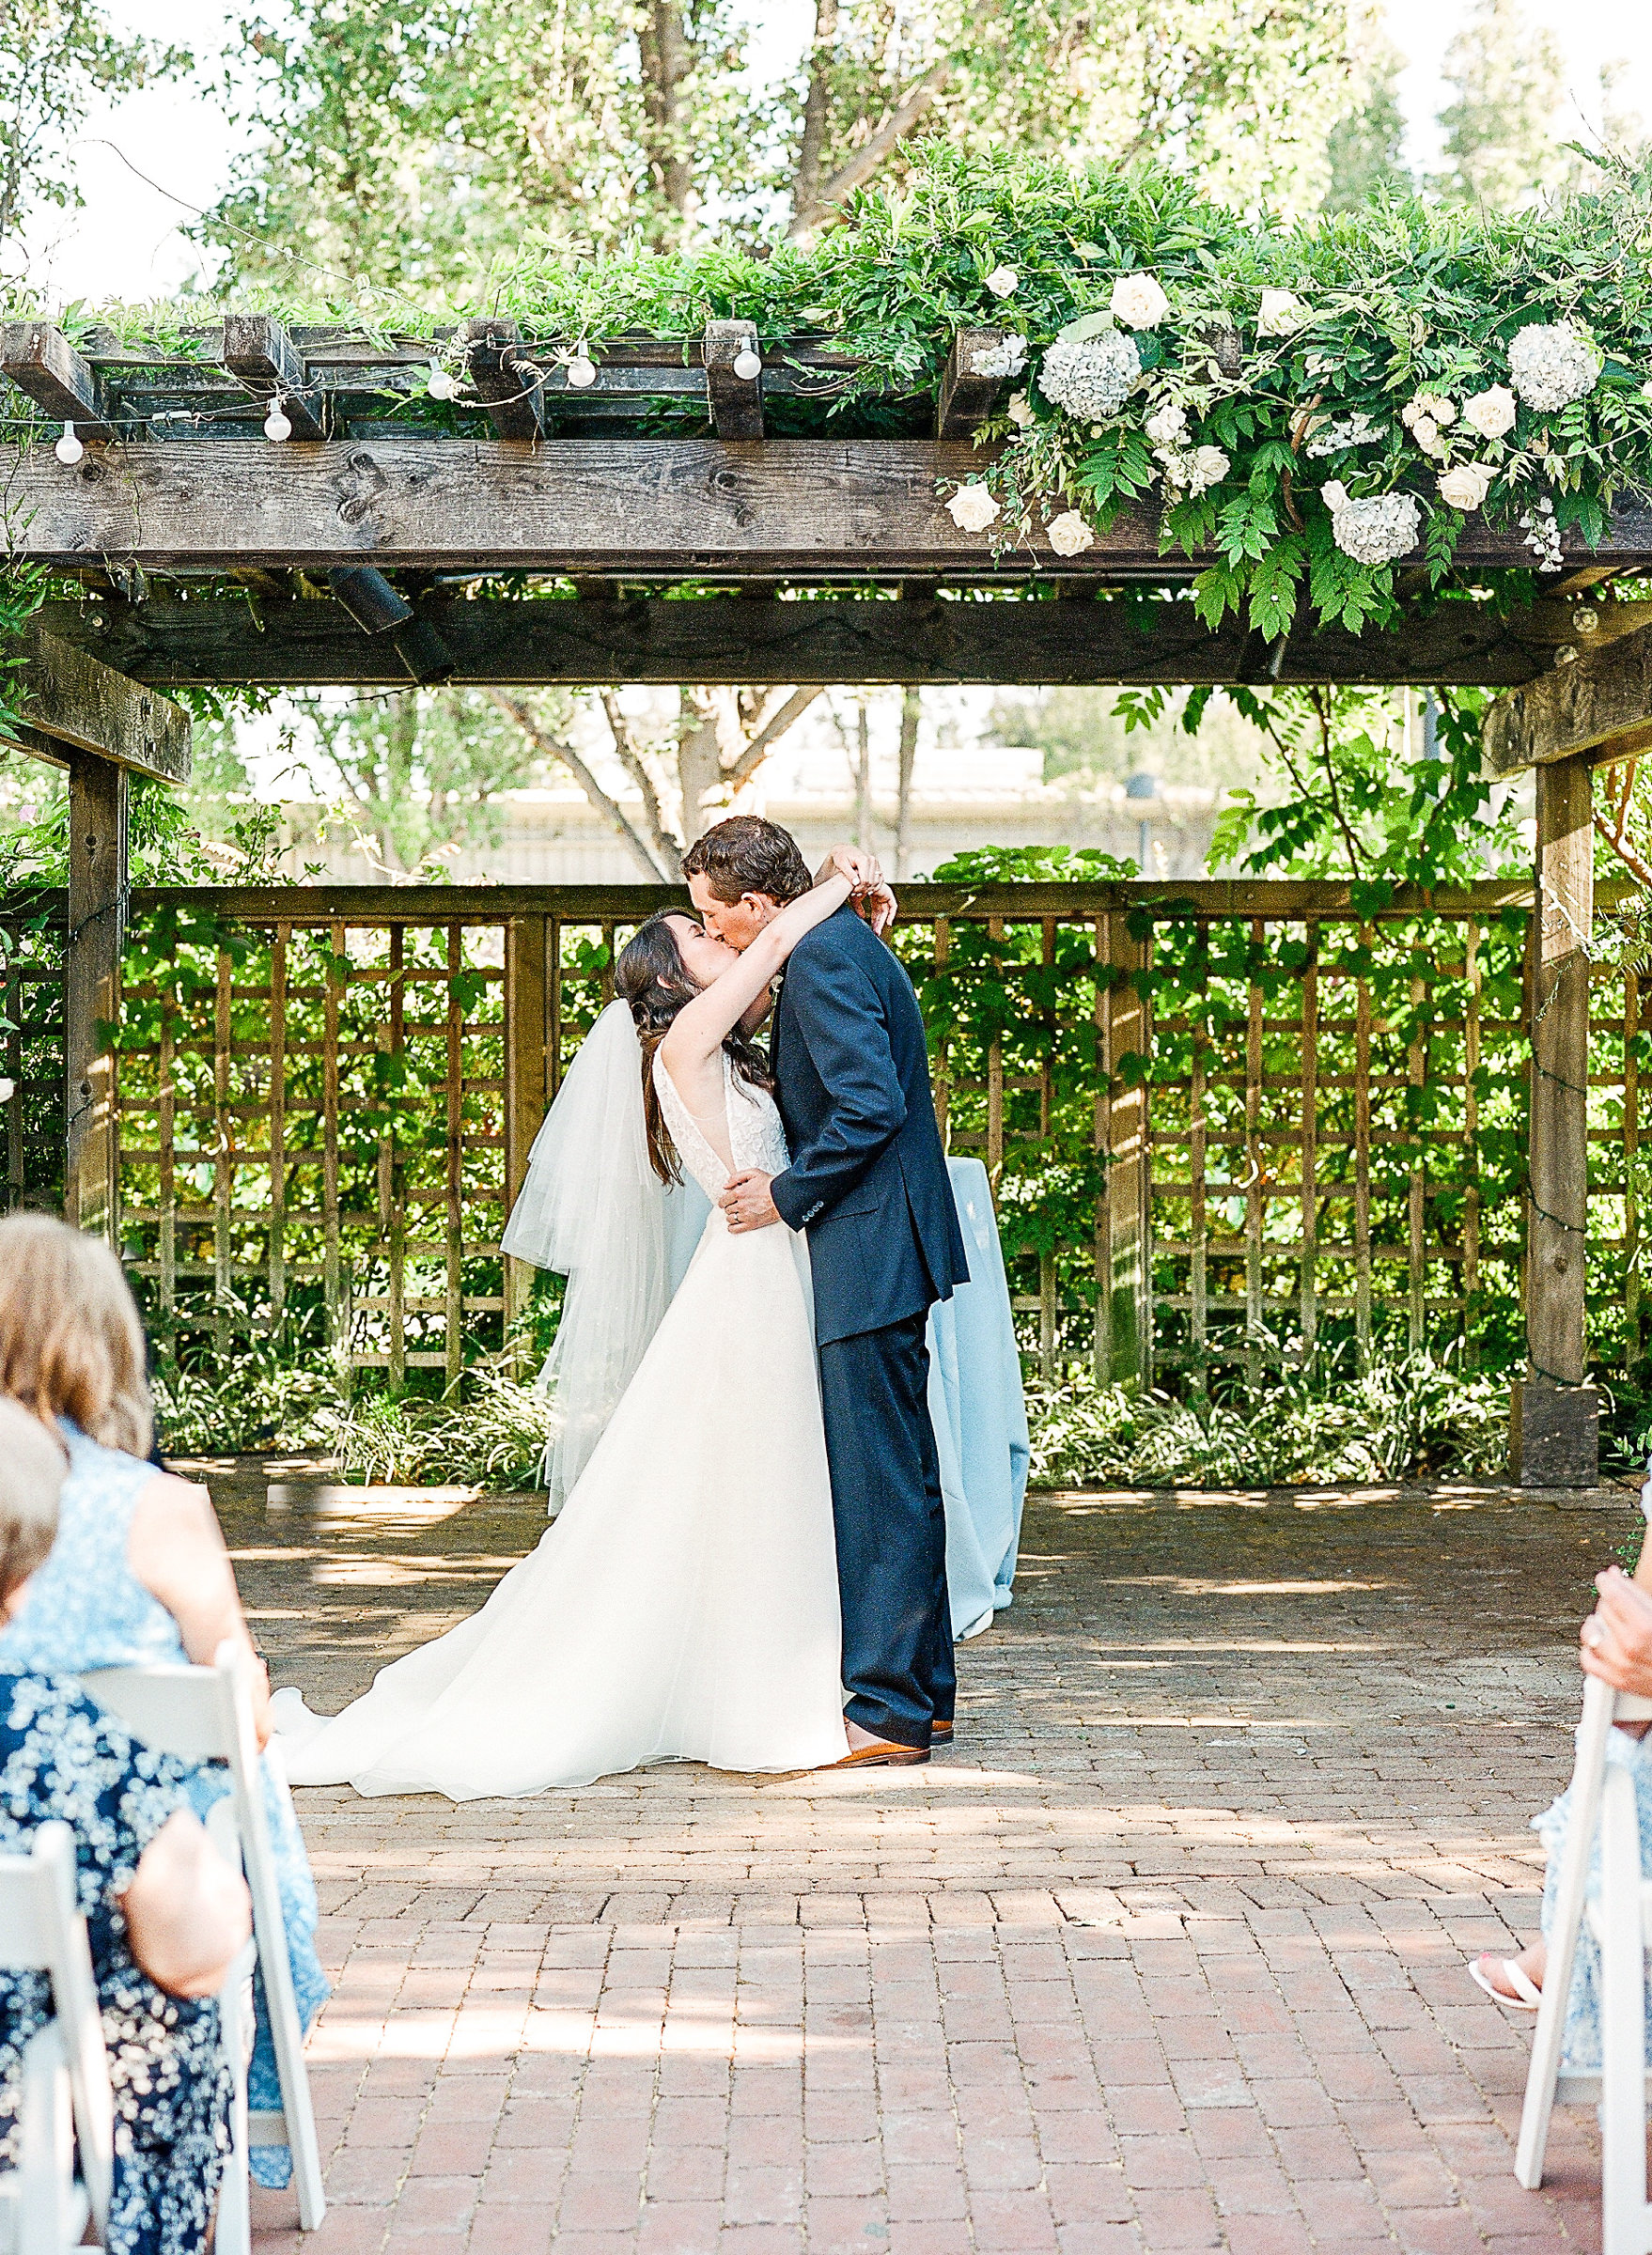 Bride and Groom's First Kiss at Classic Los Altos History Museum Garden Wedding